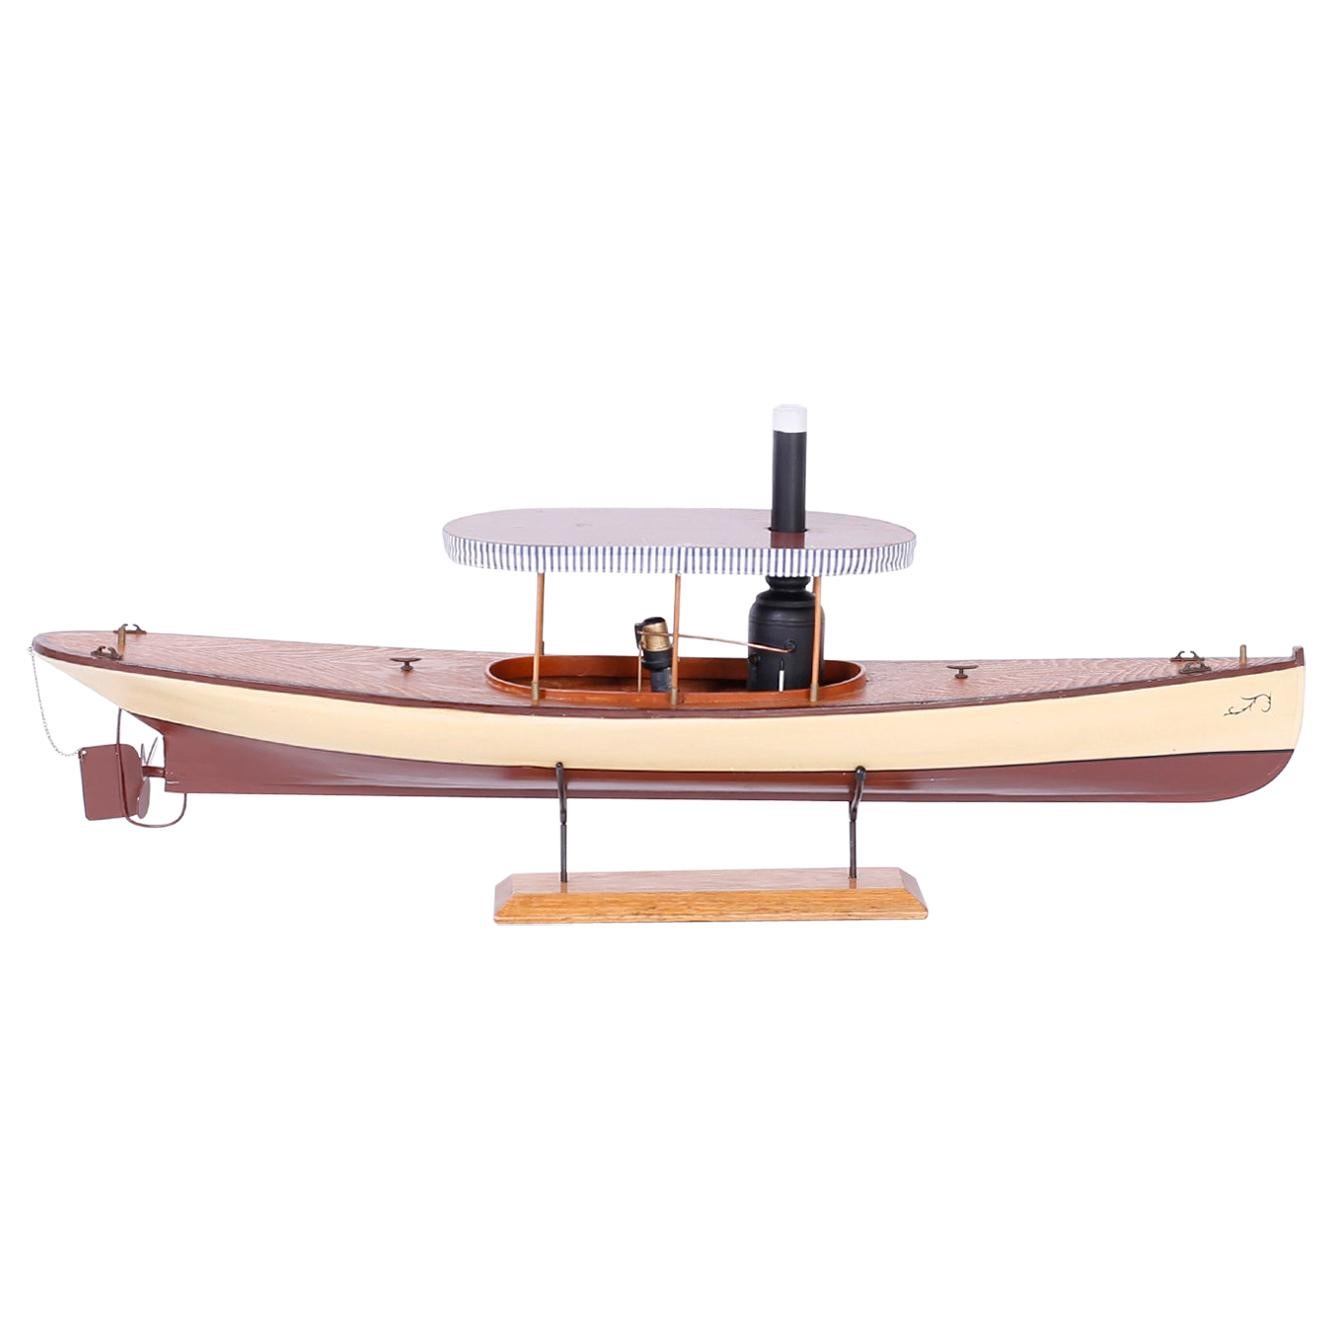 Model of a Steam Powered Boat or Launch